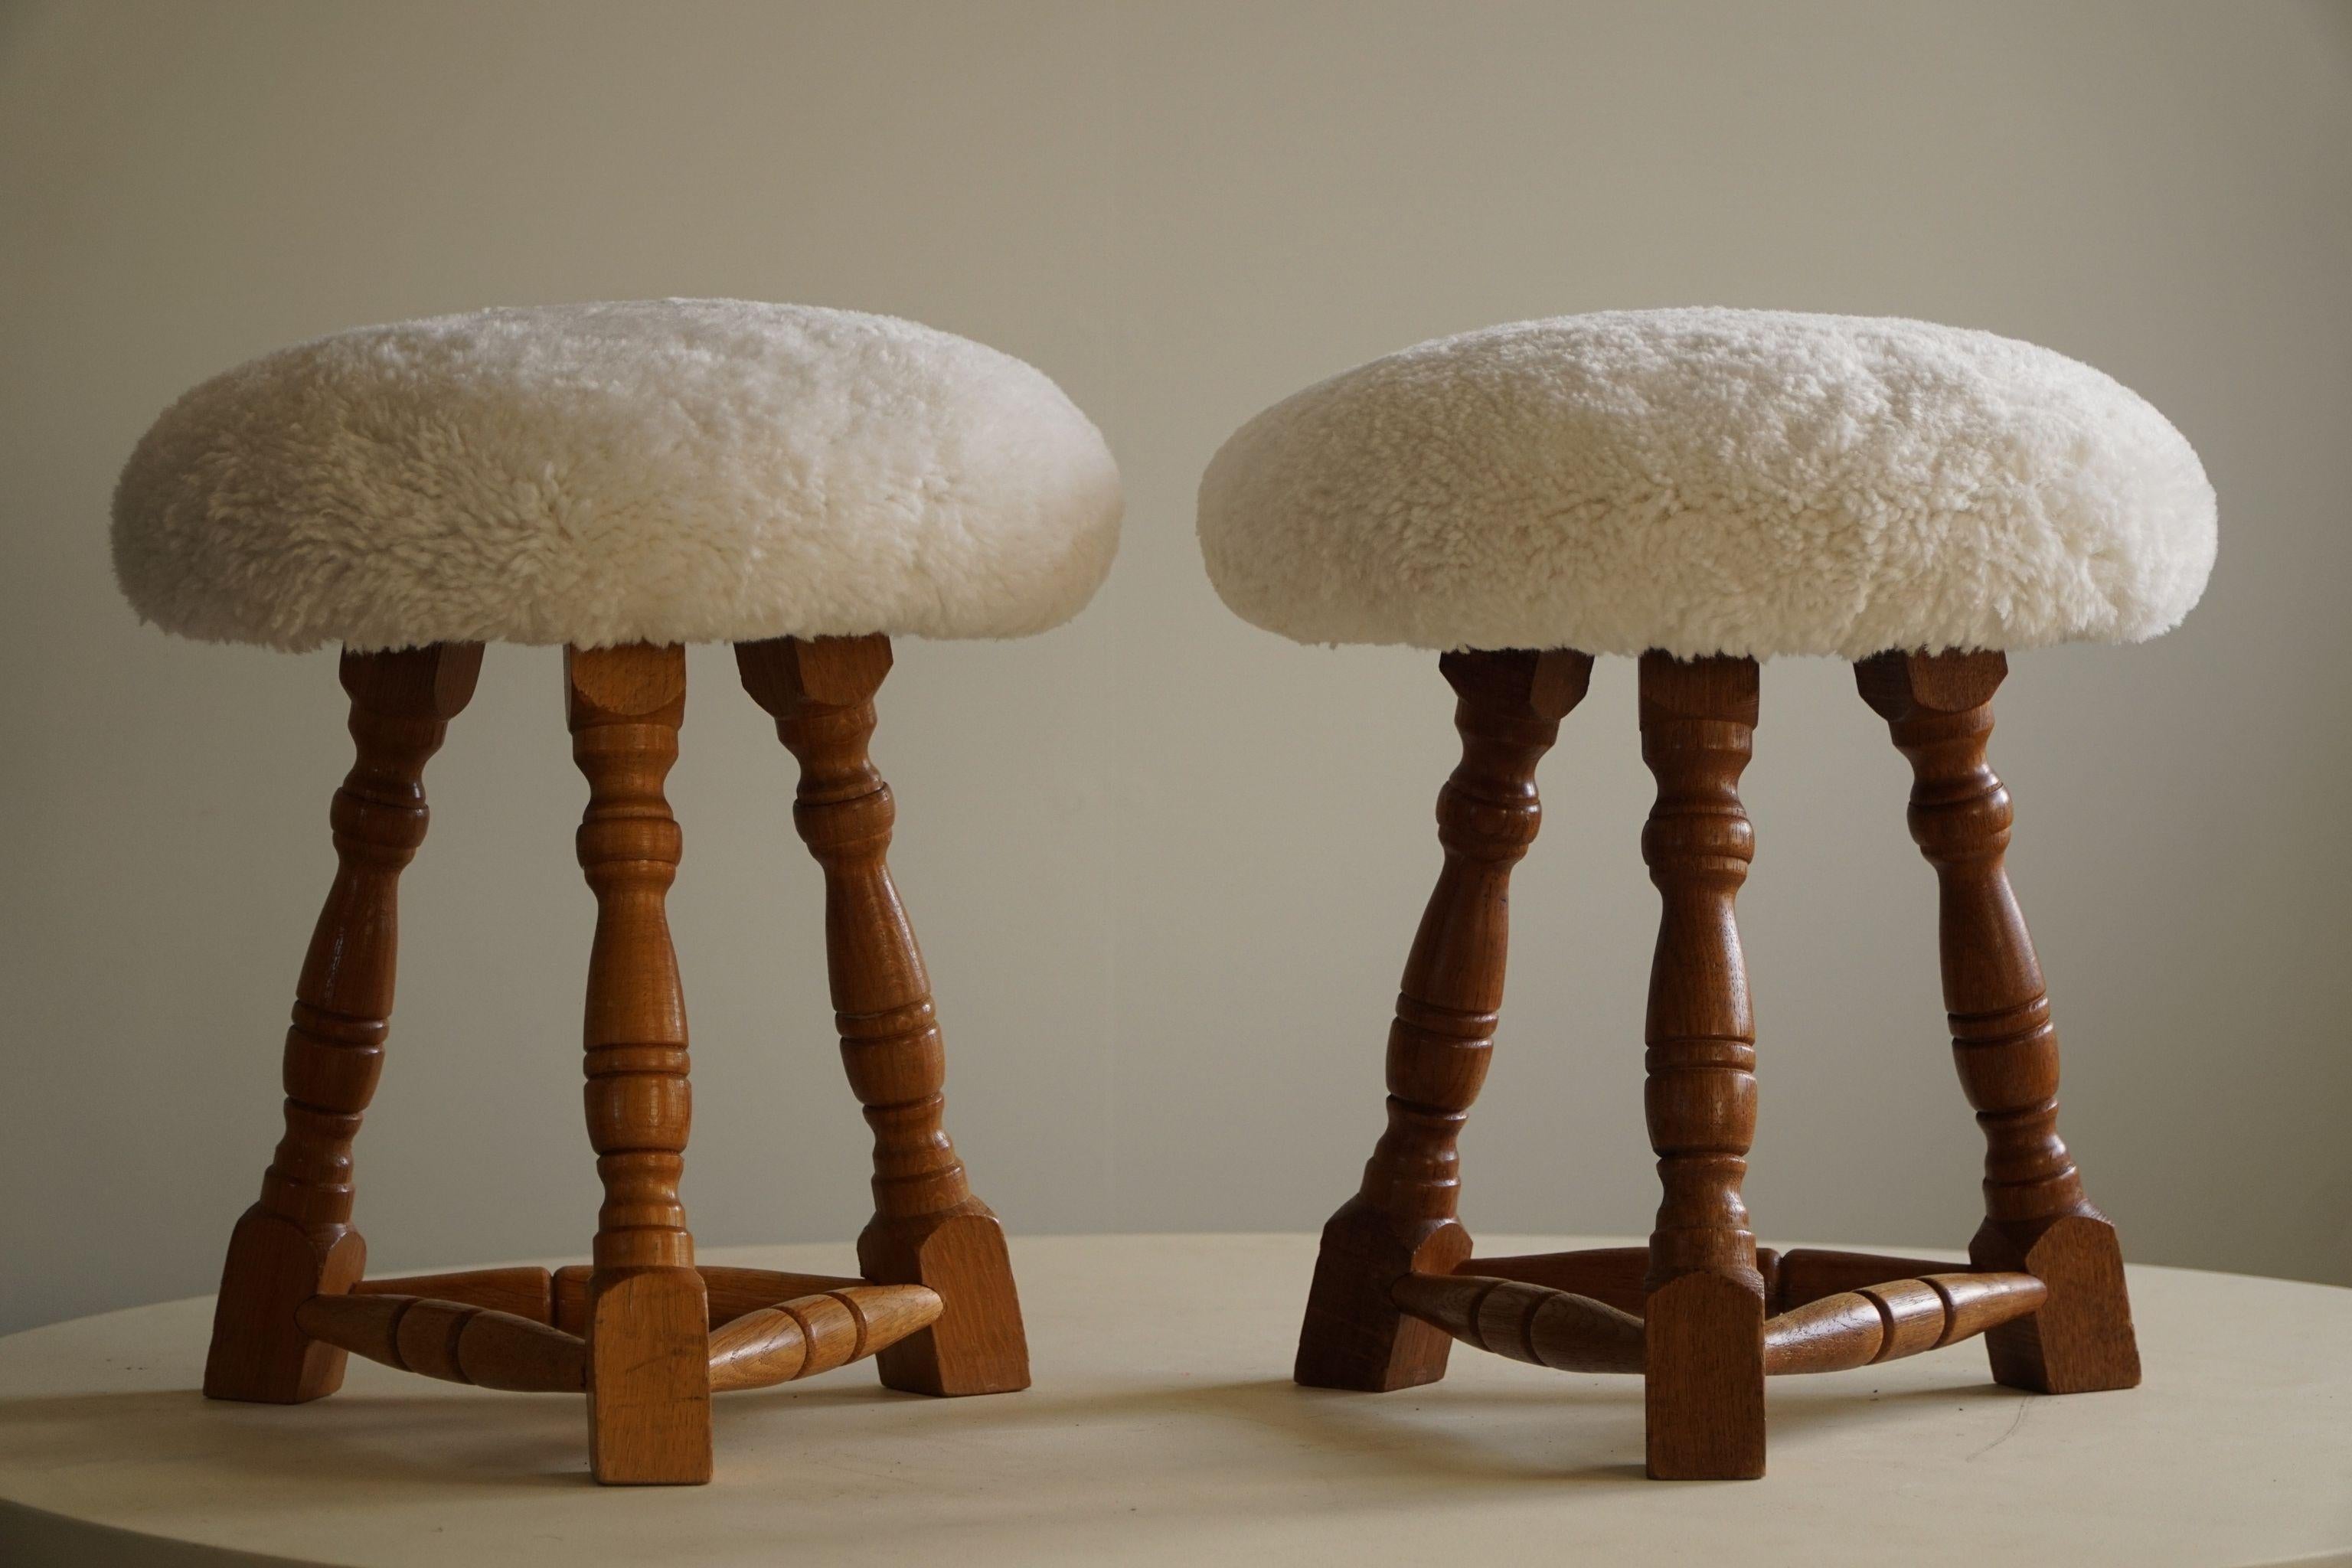 Danish Modern, A Pair of Tripod Stools, Reupholstered Seats in Lambswool, 1950s For Sale 7